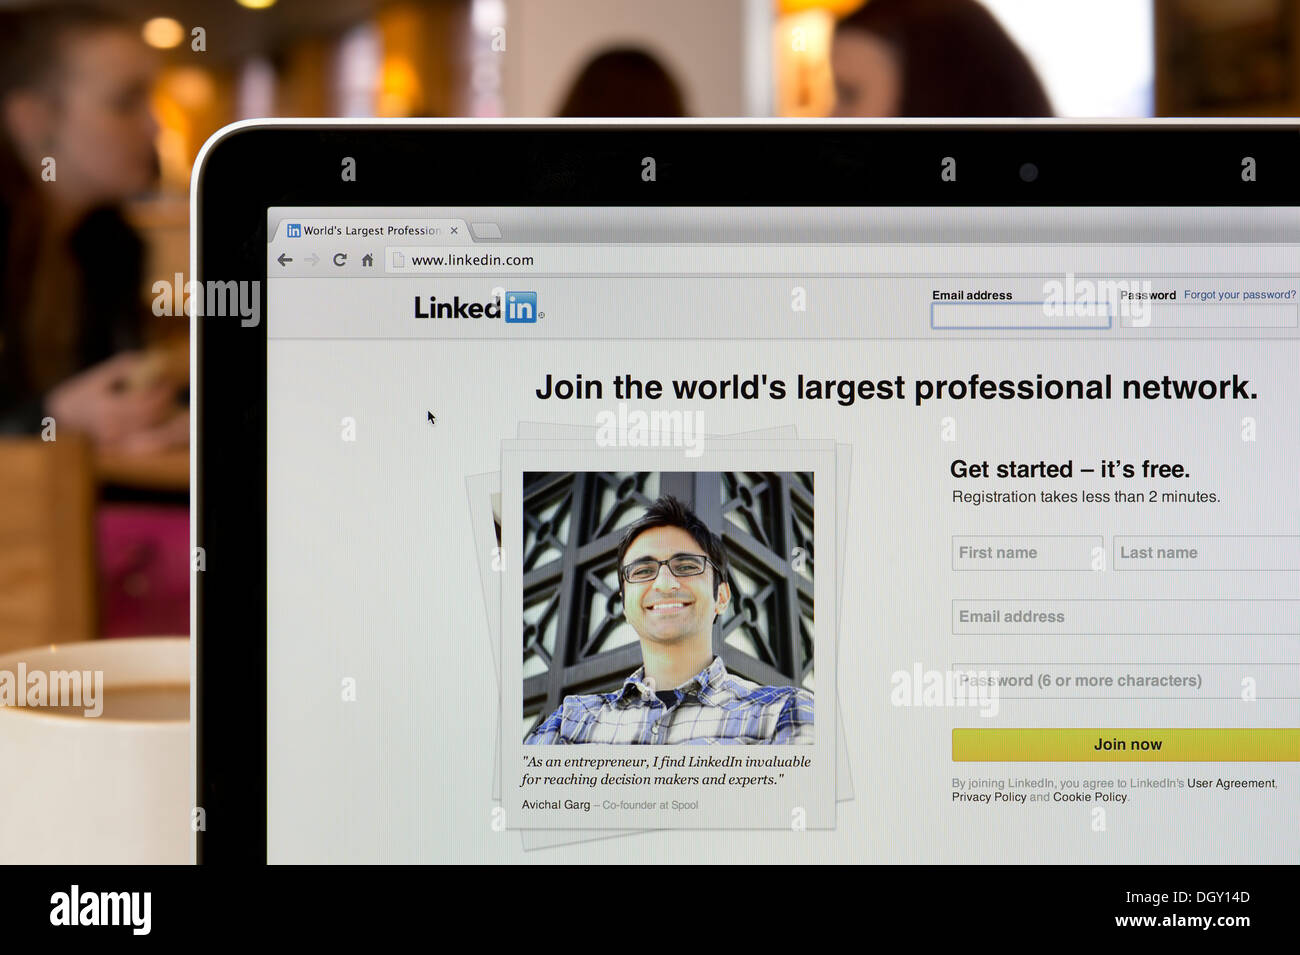 The LinkedIn website shot in a coffee shop environment (Editorial use only: print, TV, e-book and editorial website). Stock Photo